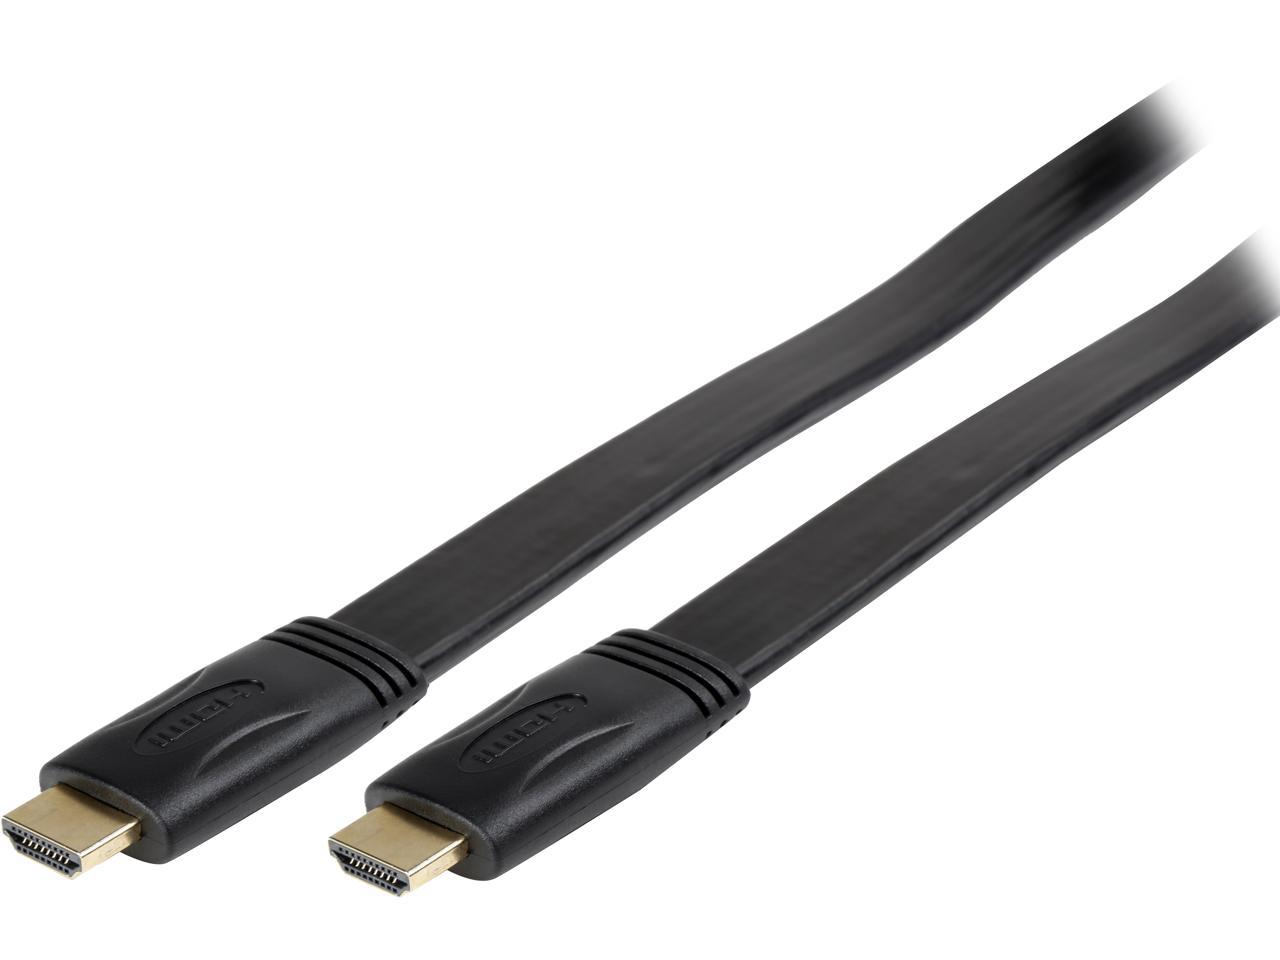 StarTech.com HDMIMM25FL 25 ft. Black Flat High Speed HDMI Cable with Ethernet Male to Male